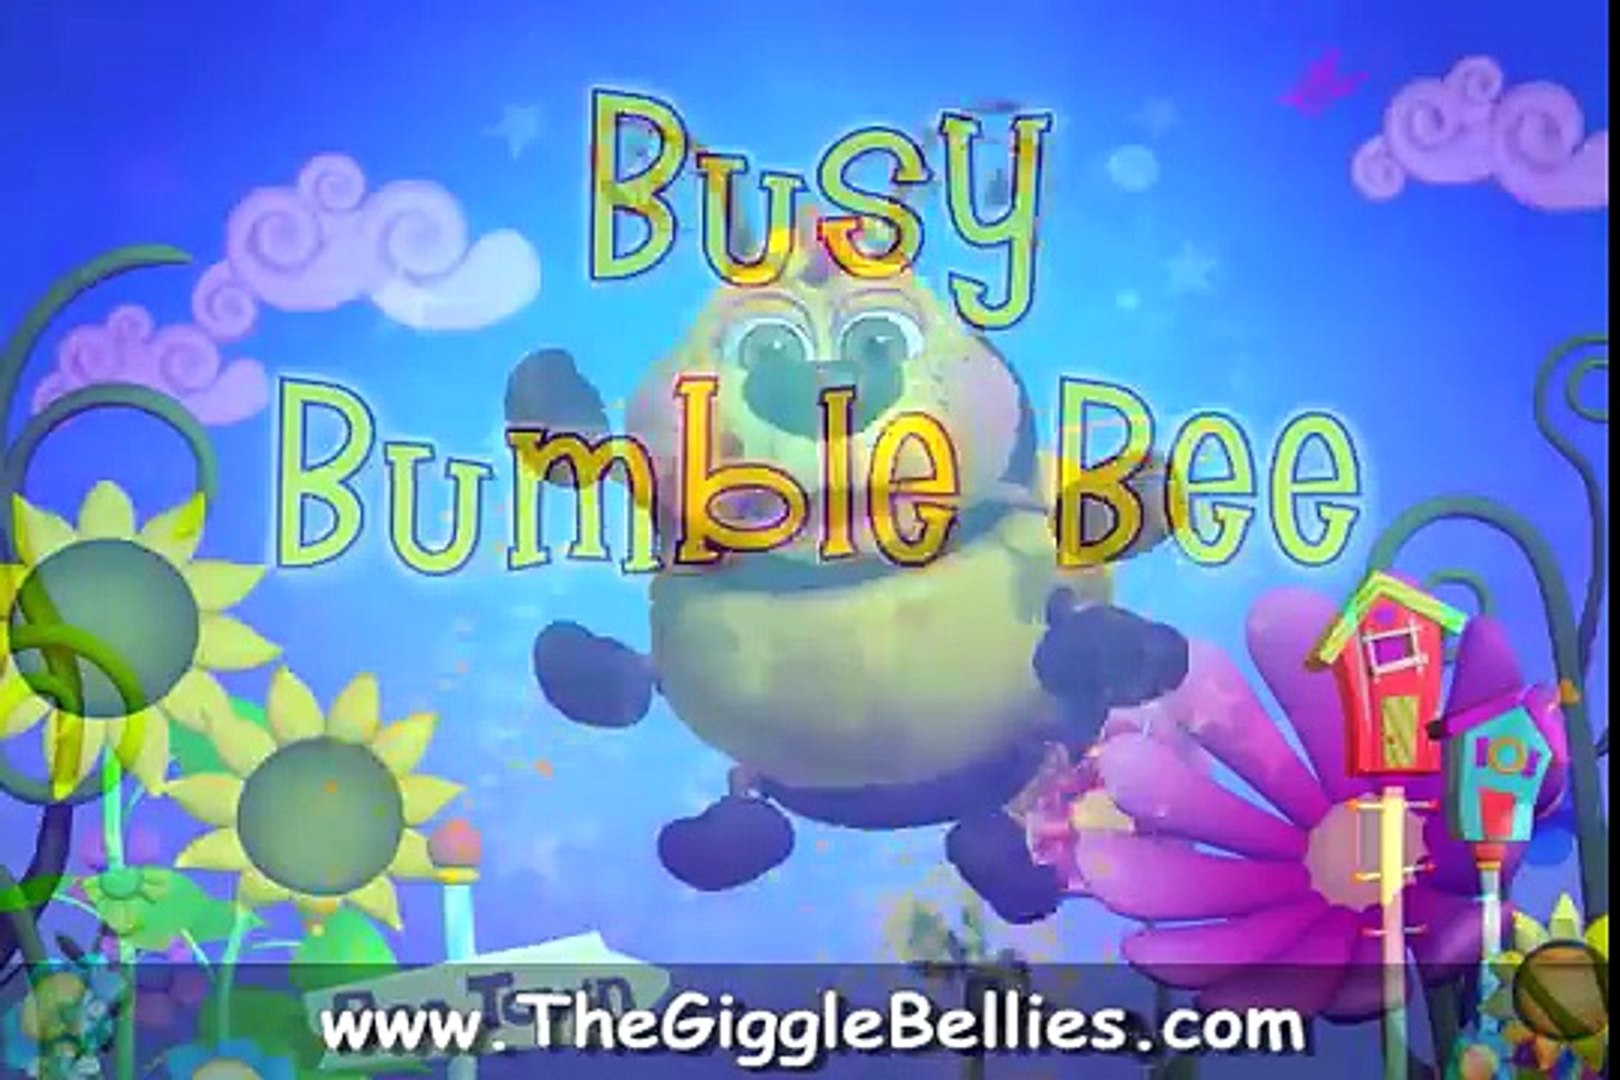 Busy Bumble Bee   Learning Songs   GiggleBellies